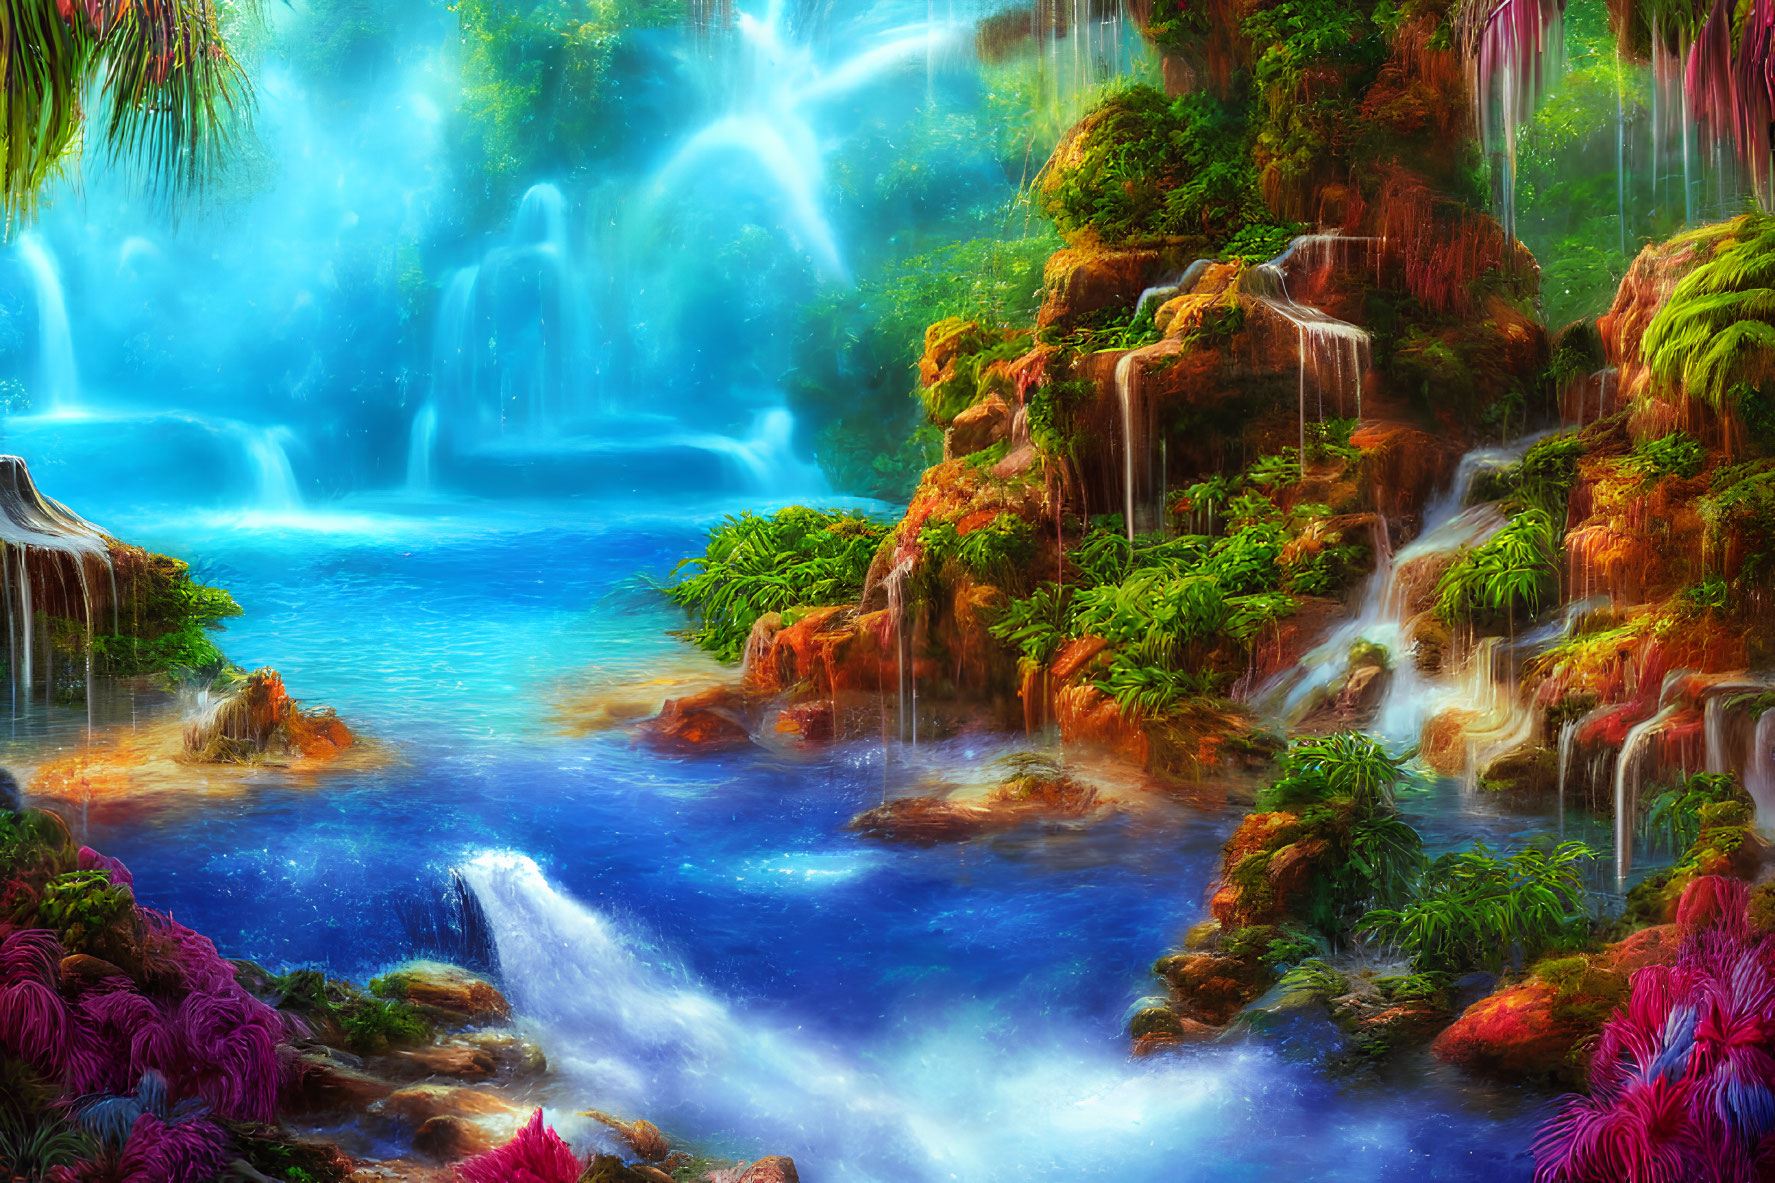 Colorful landscape with multiple waterfalls and turquoise pool surrounded by lush flora